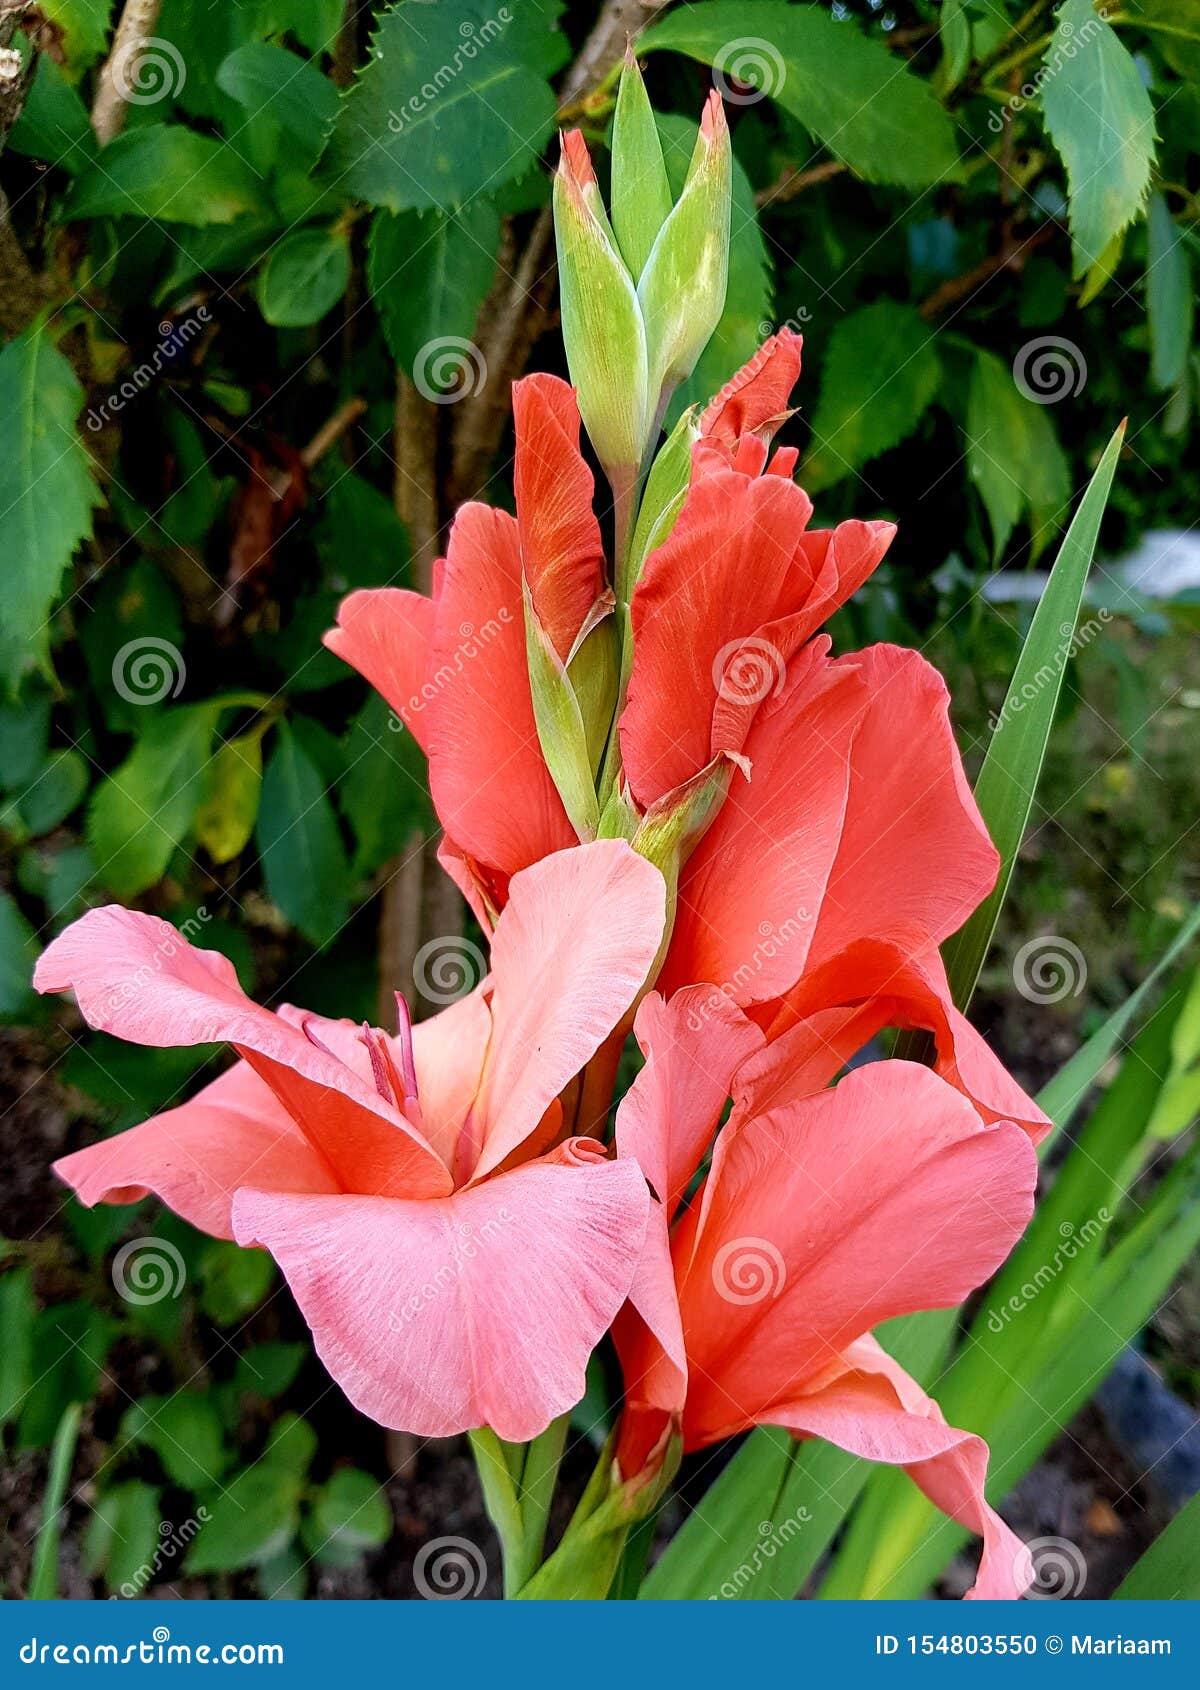 sword lily also called gladioli. gladiolus flower blossoms.